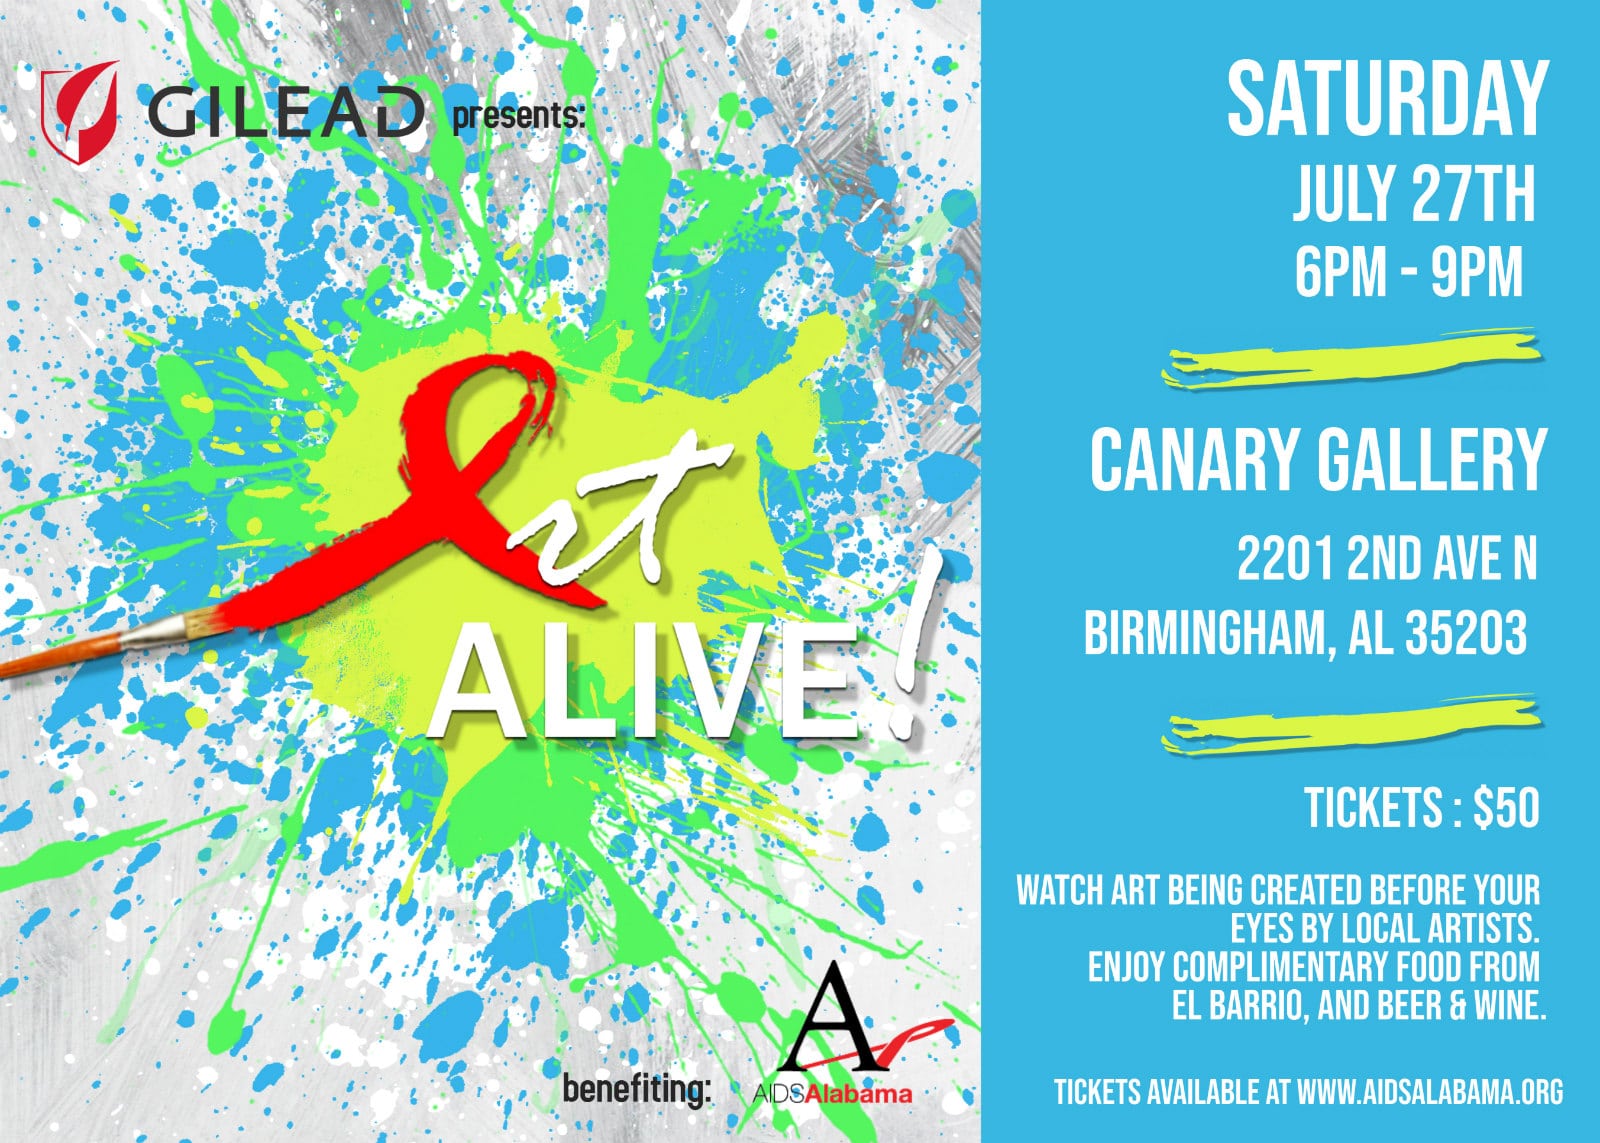 Art Alive! is a benefit for AIDS Alabama at the Canary Gallery in Birmingham. 